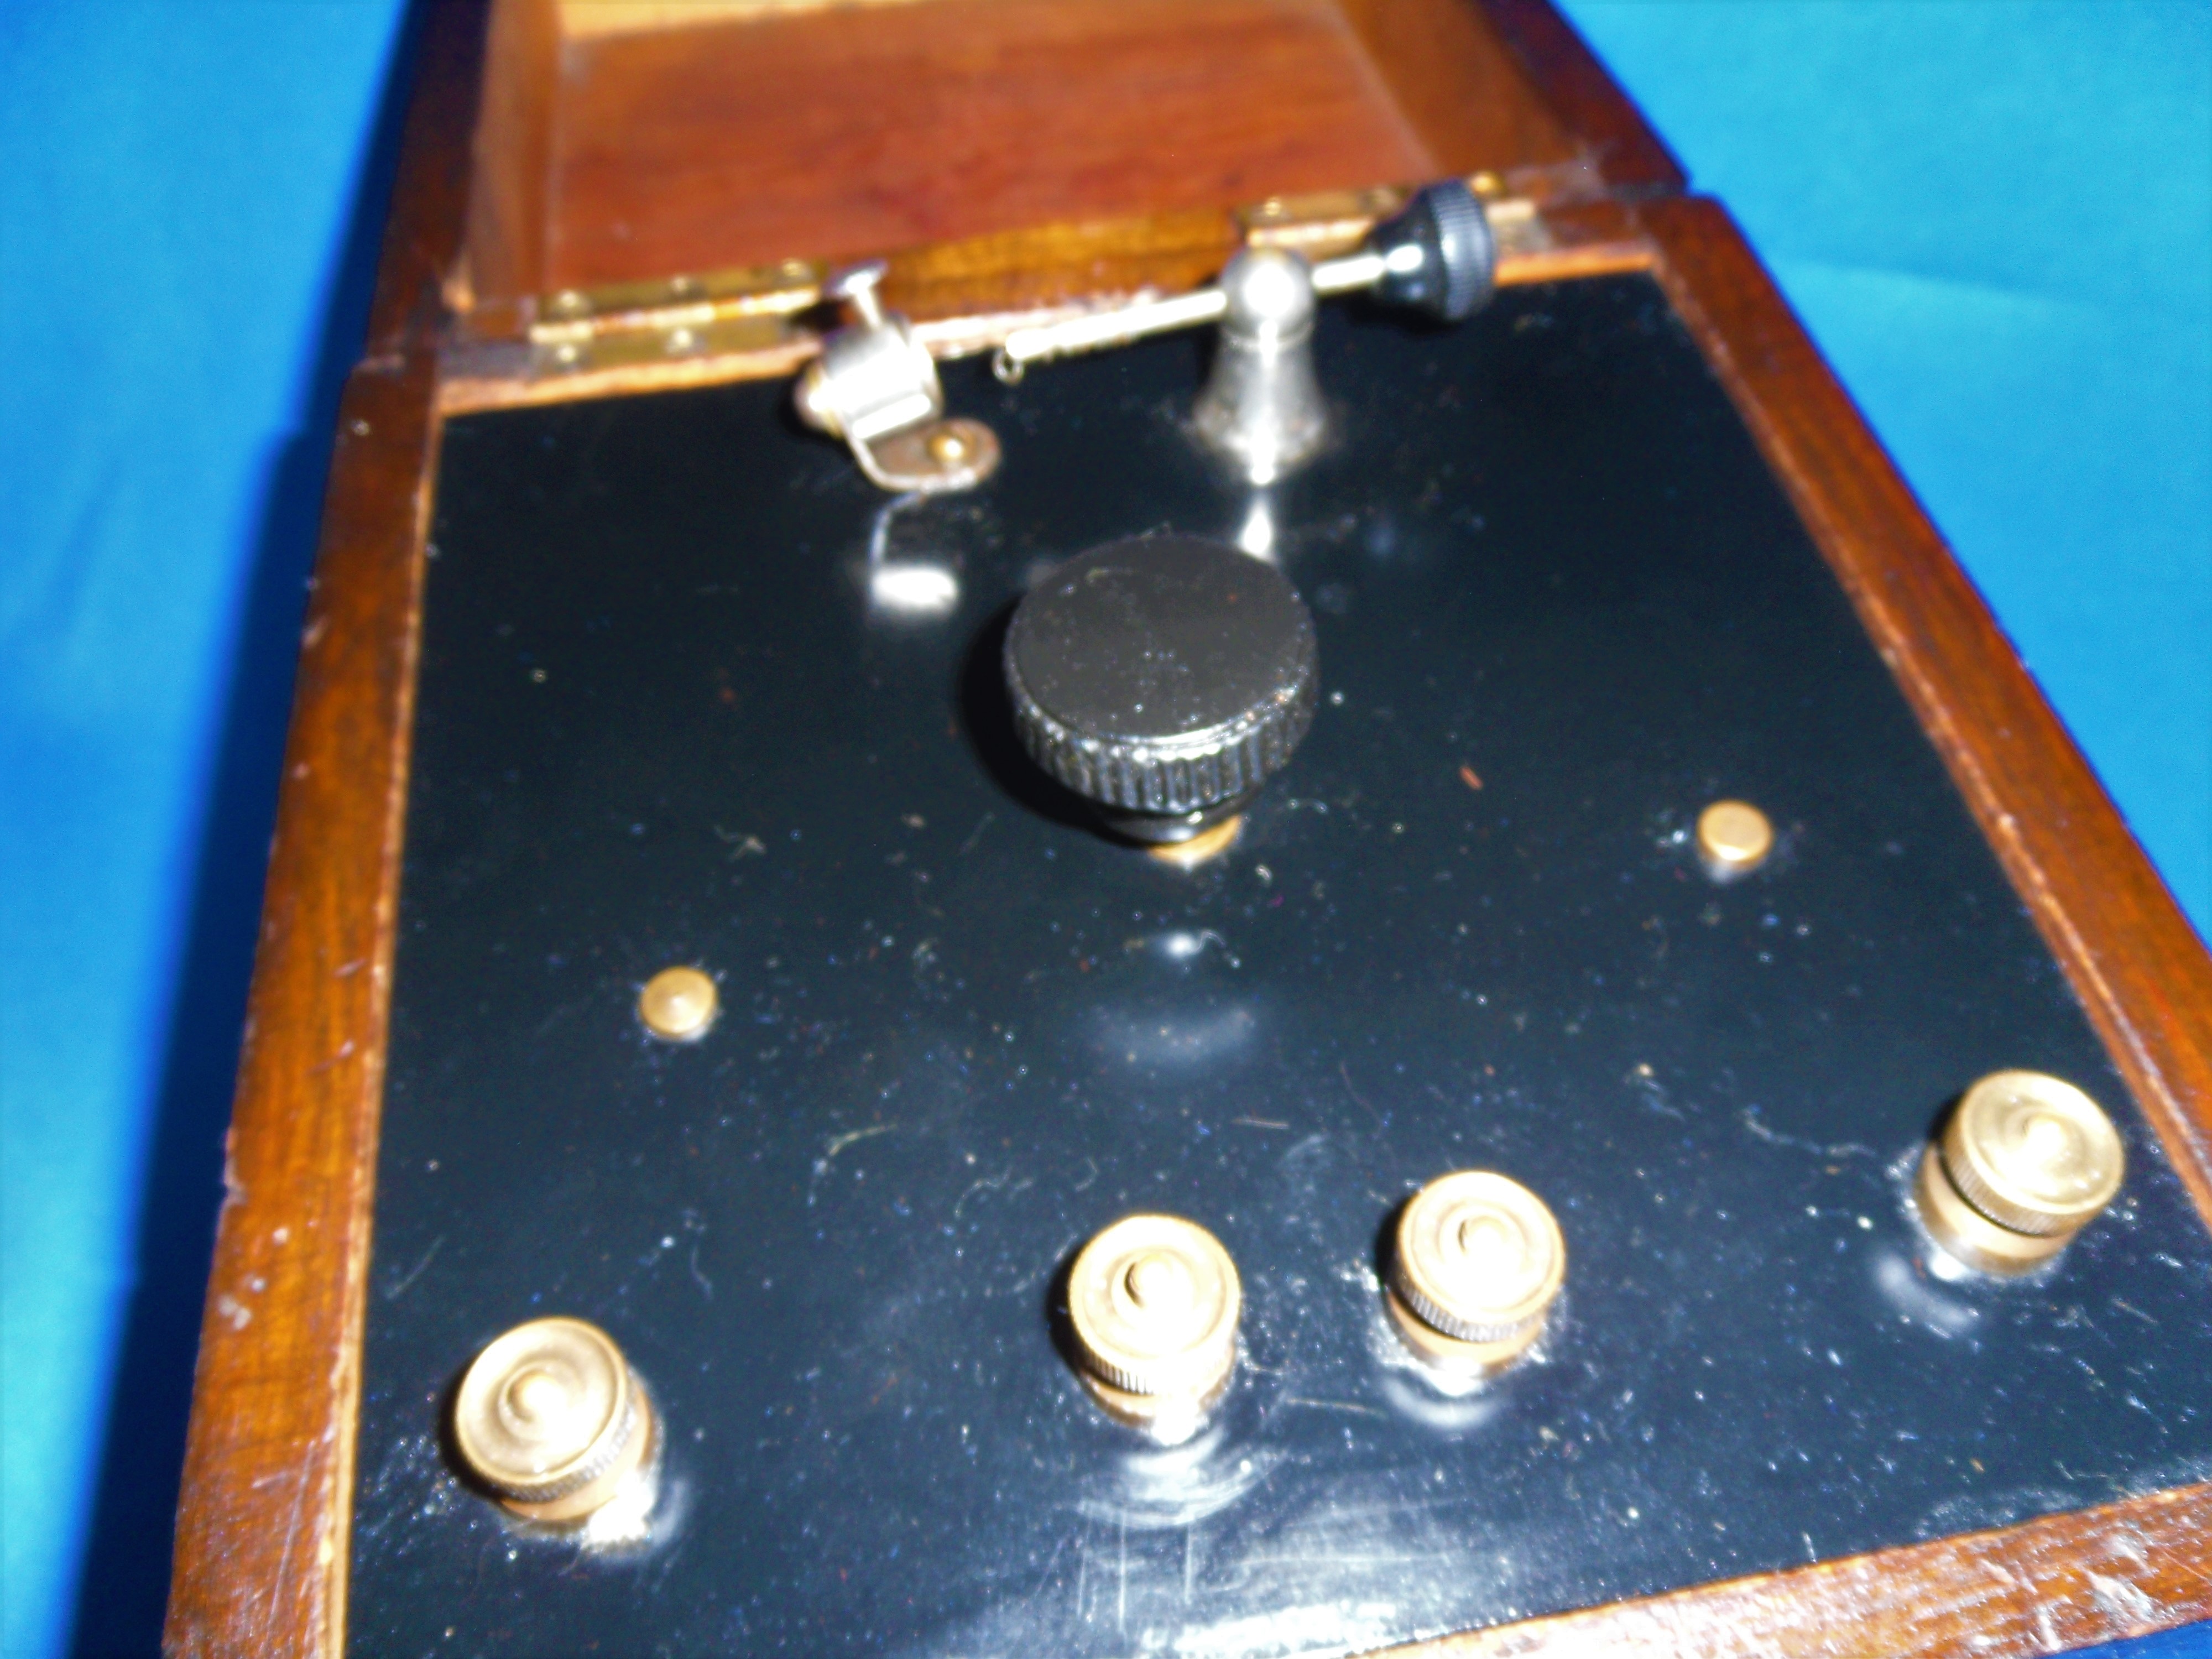 Antique Crystal Radio Believed a "The Post Office Box" Boxed Dr CECIL Crystal - Image 2 of 8